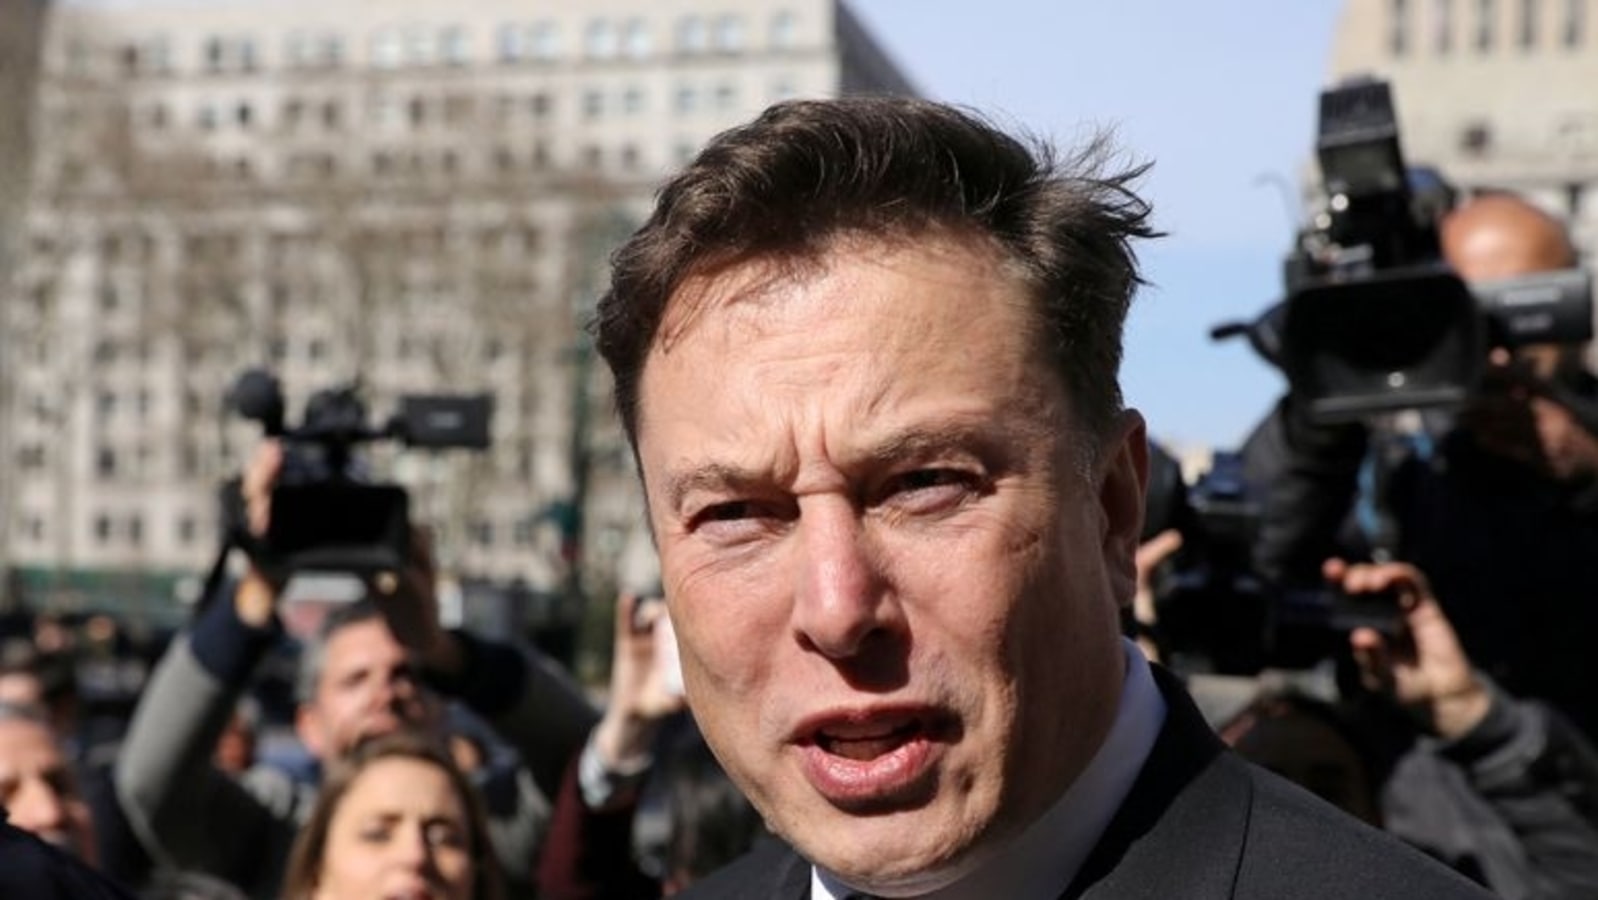 elon-musk-slow-walking-on-lawsuit-says-twitter-judge-tests-covid-ve-reports